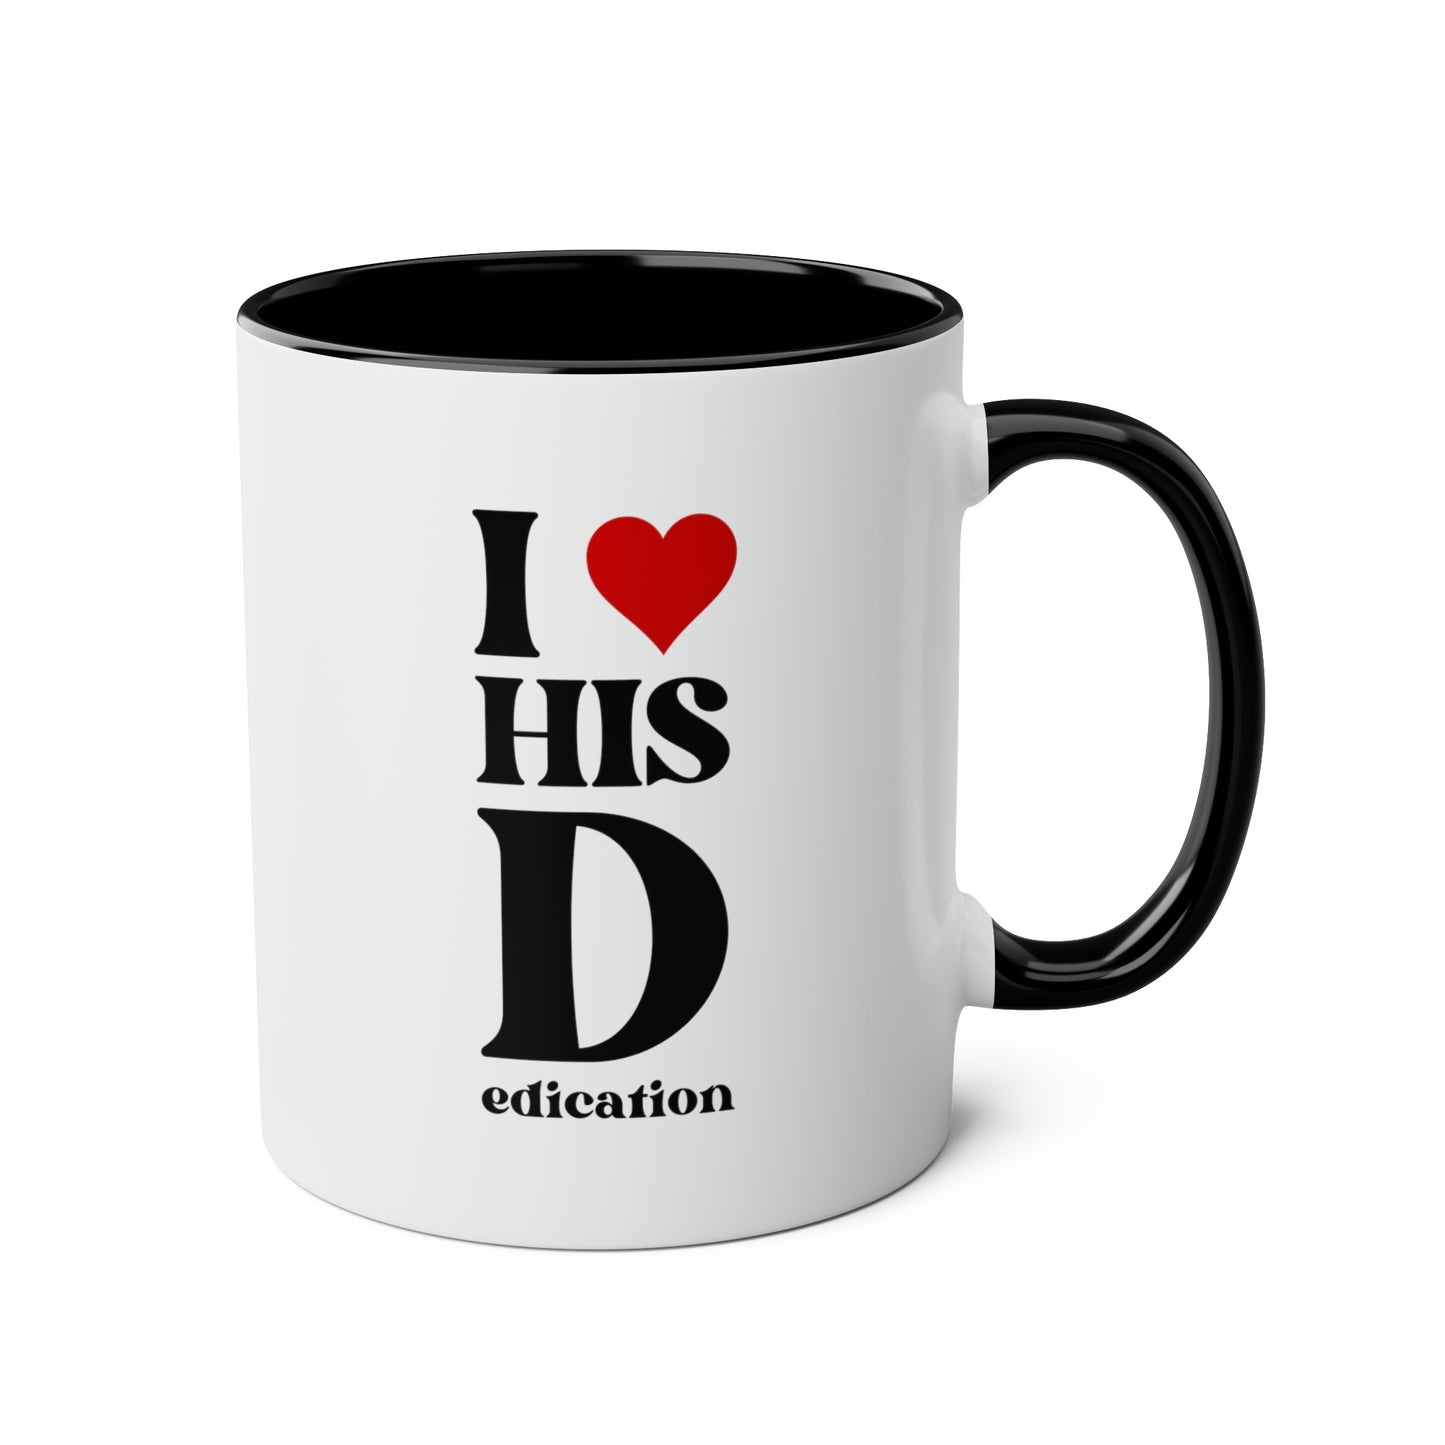 I Heart His Dedication 11oz white with black accent funny large coffee mug gift for him boyfriend men husband valentines anniversary waveywares wavey wares wavywares wavy wares